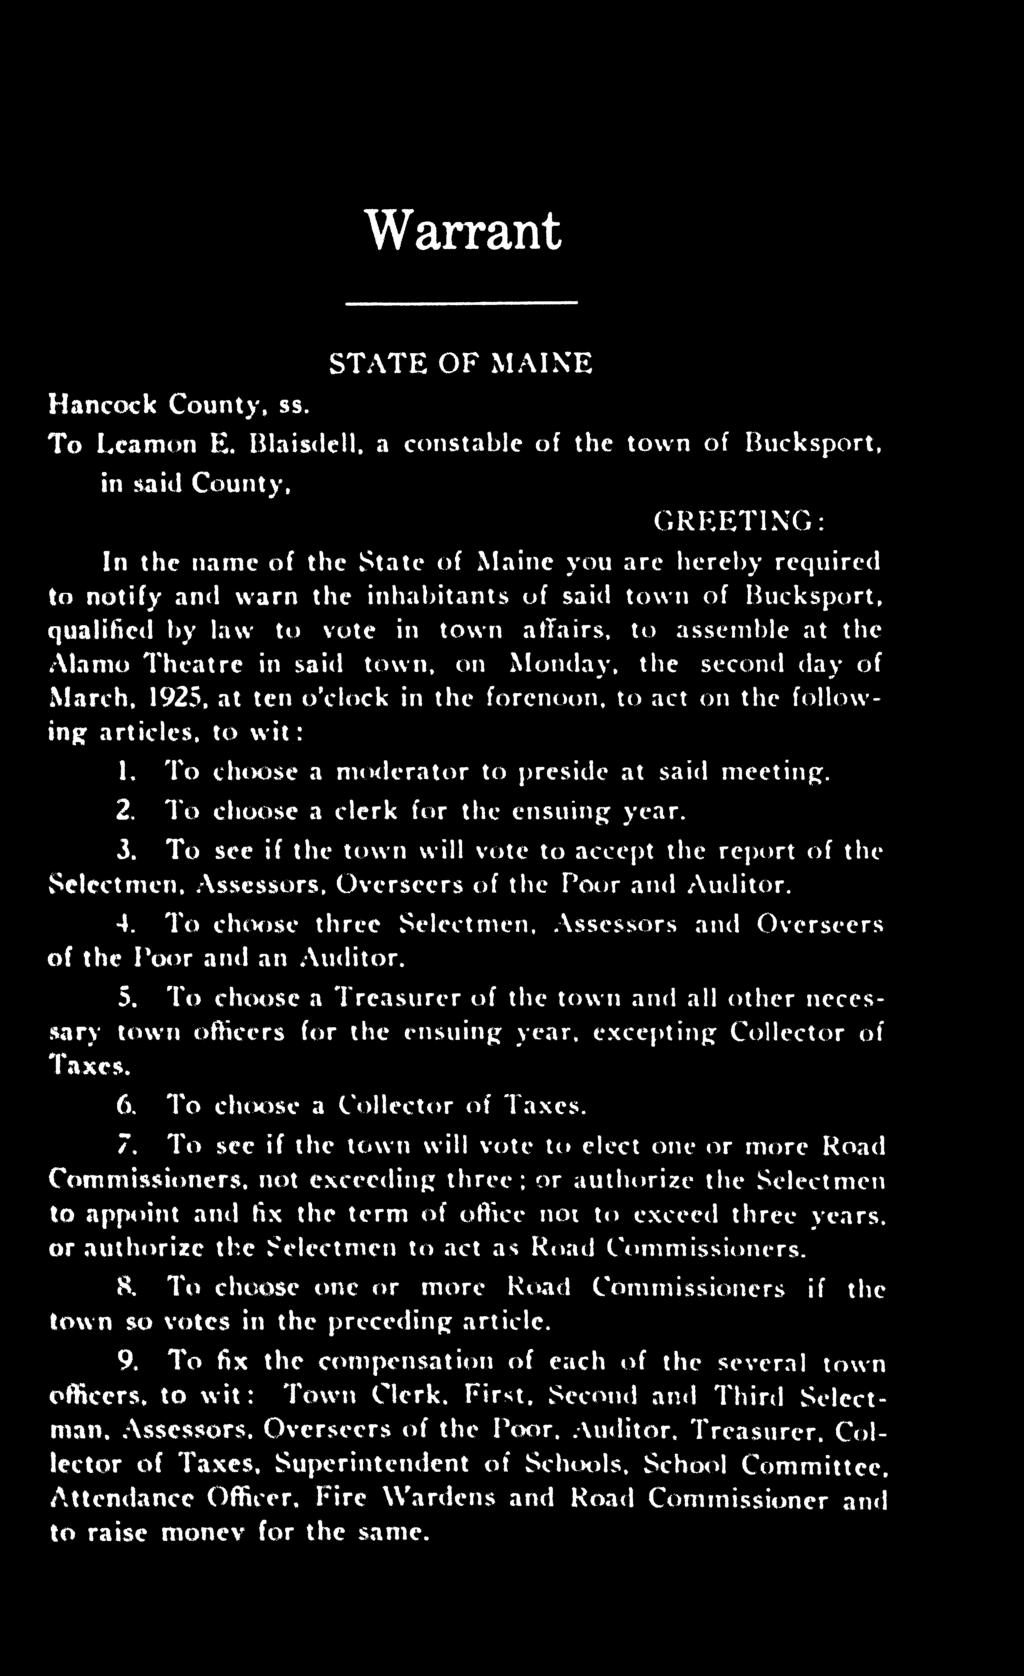 qualified by law to vote in town affairs, to assemble at the Alamo Theatre in said town, on Monday, the second day of «r «r March, 1925, at ten o'clock in the forenoon, to act on the following